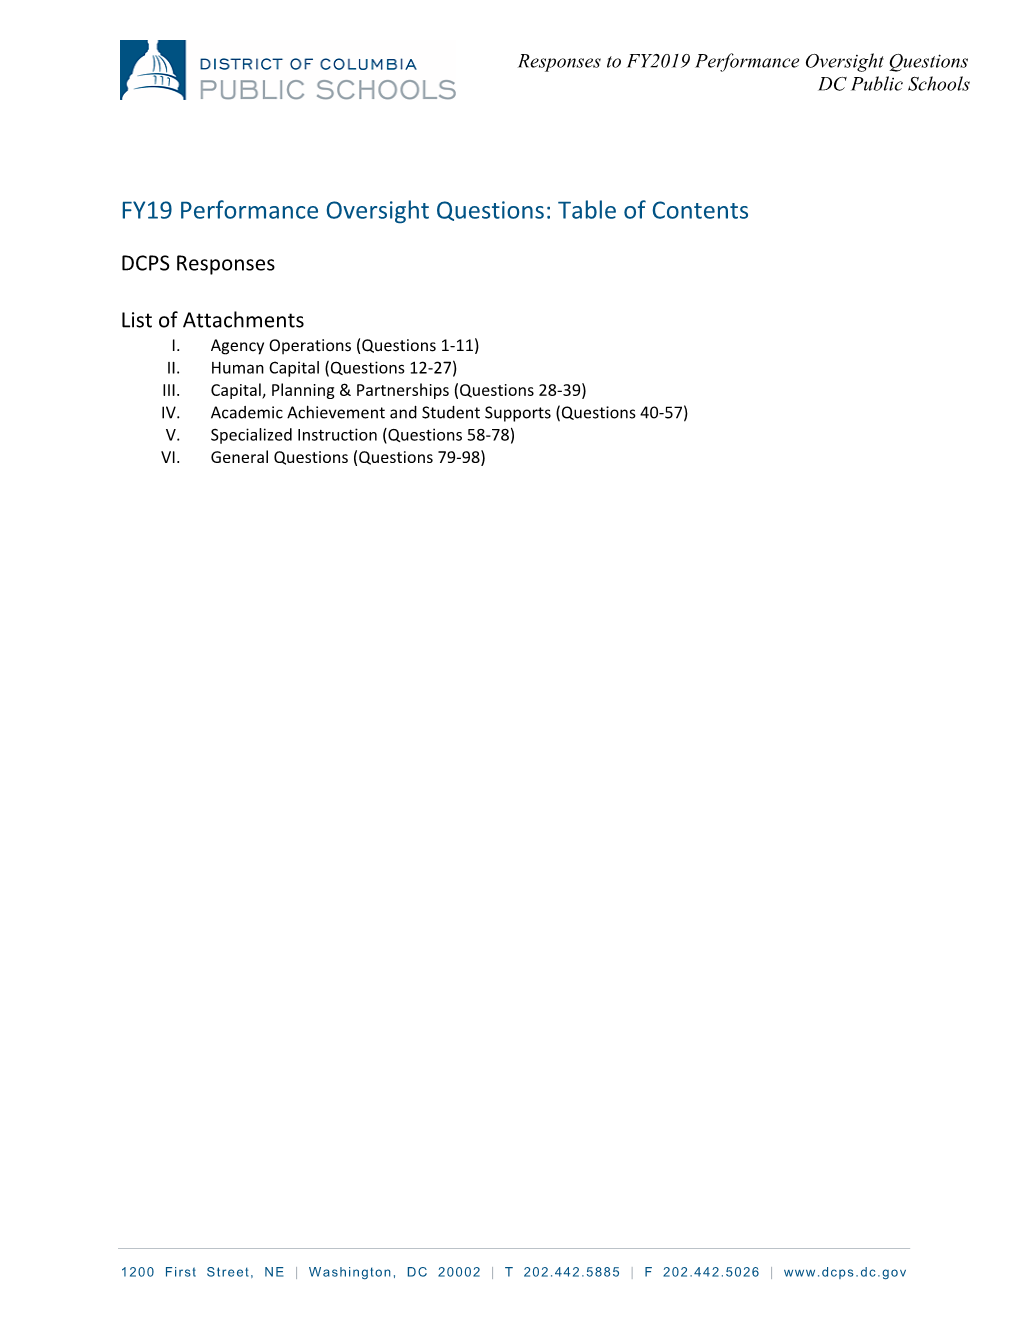 FY19 Performance Oversight Questions: Table of Contents